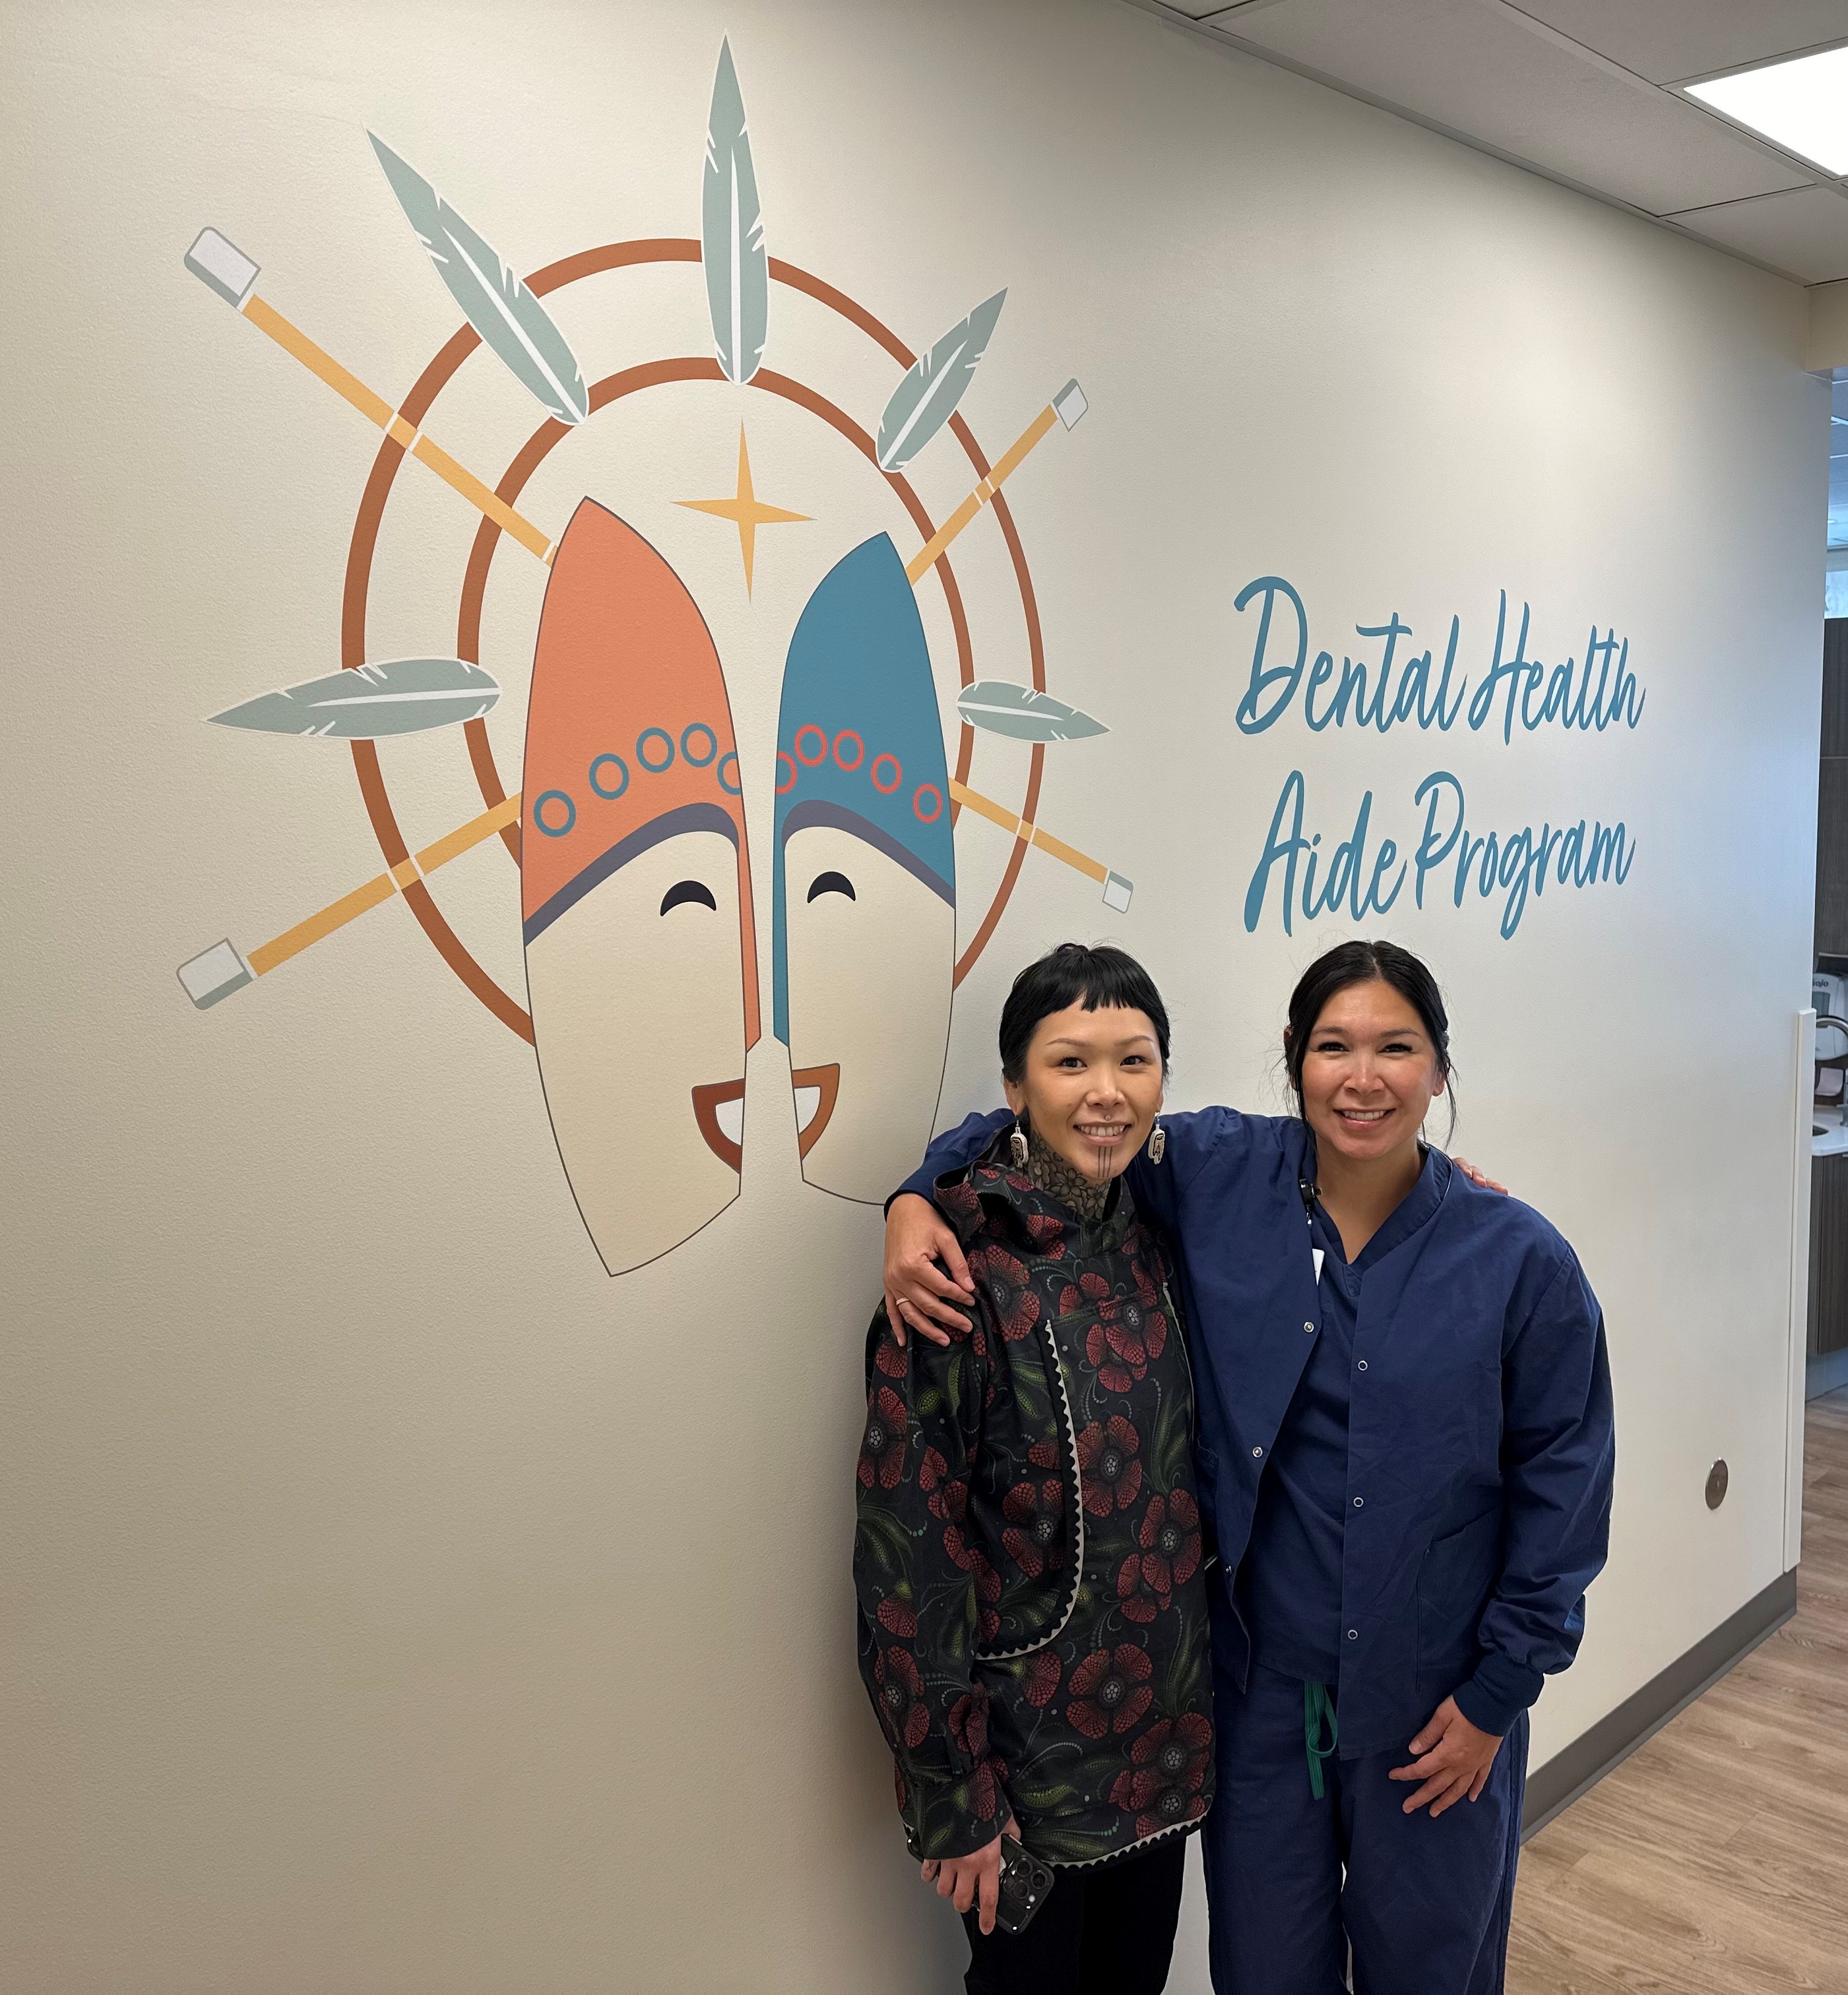 Passion for Dental Therapy Runs in the Family